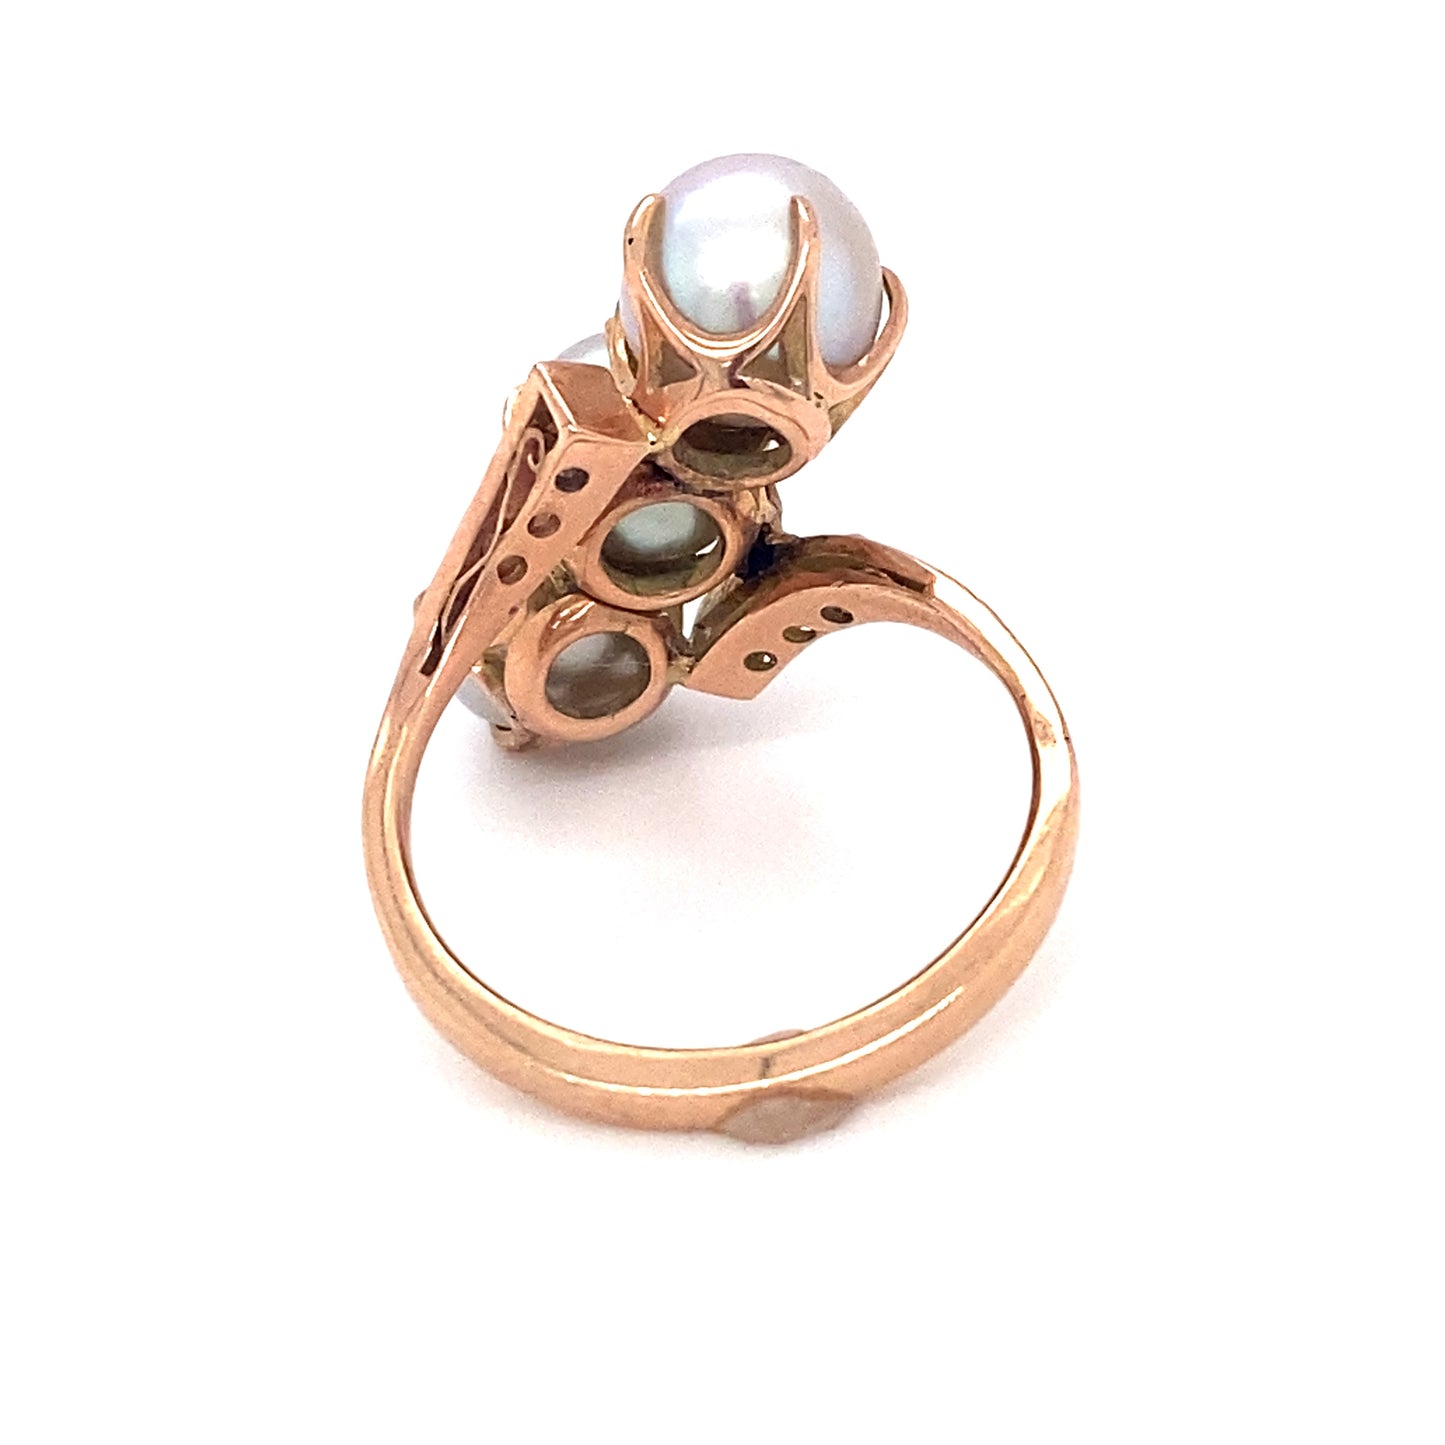 Circa 1920s South Sea Pearl Ring with Seed Pearls in 14K Rose Gold